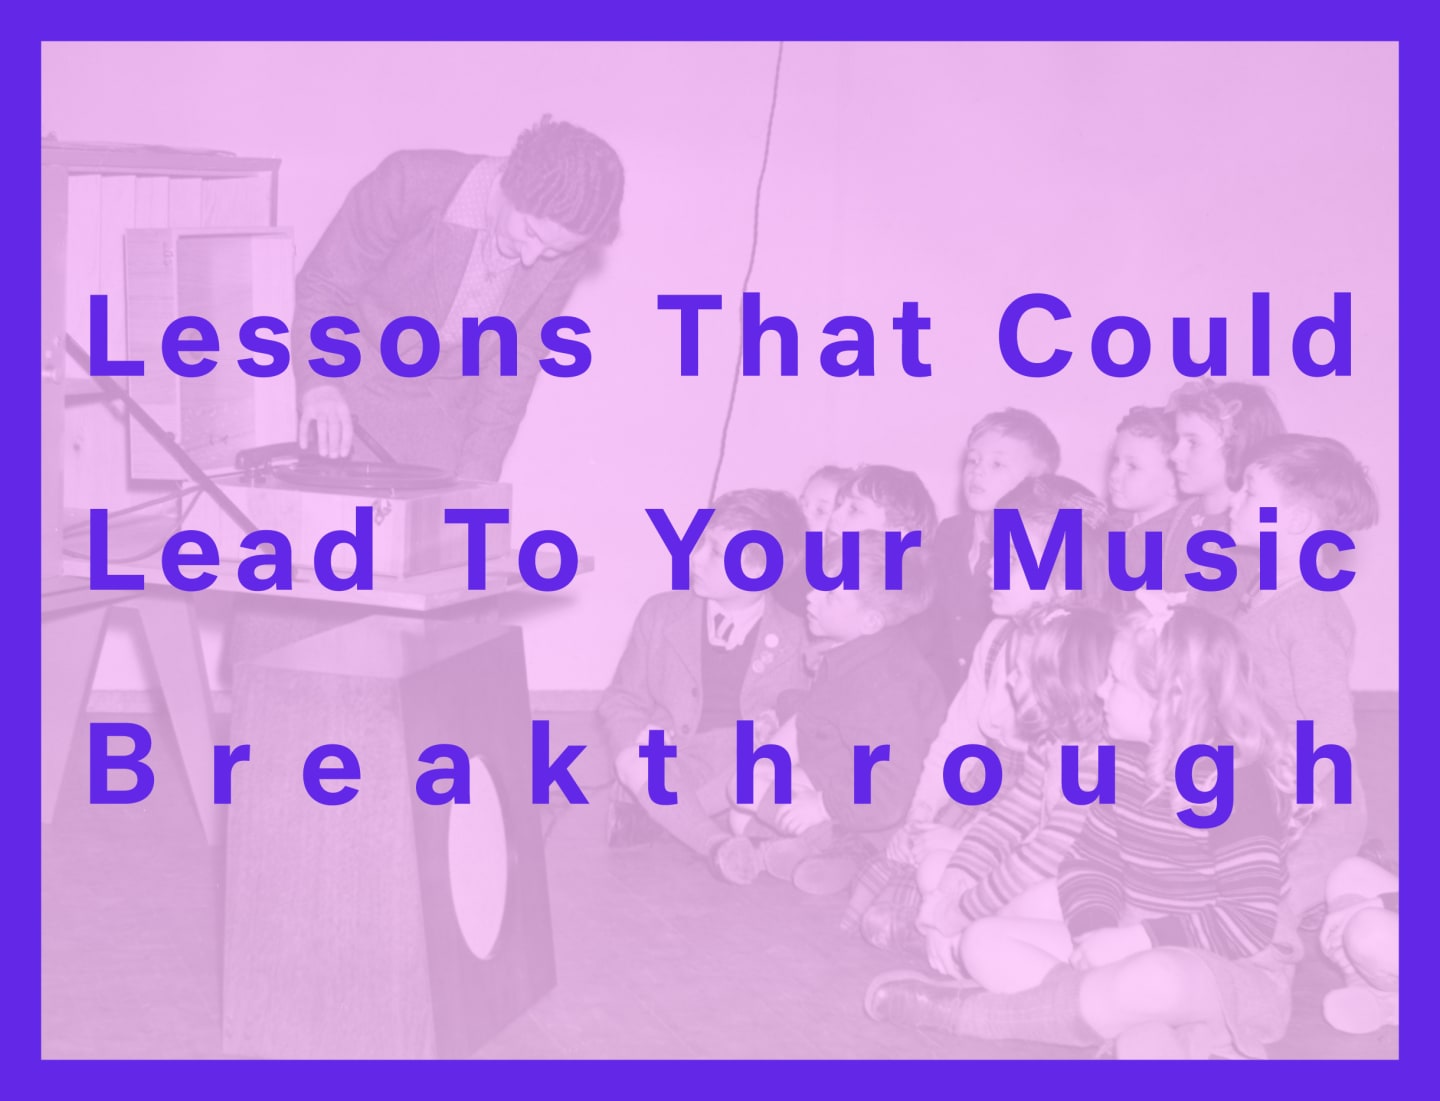 9 Potentially Life-Changing Ways To Approach Your Music